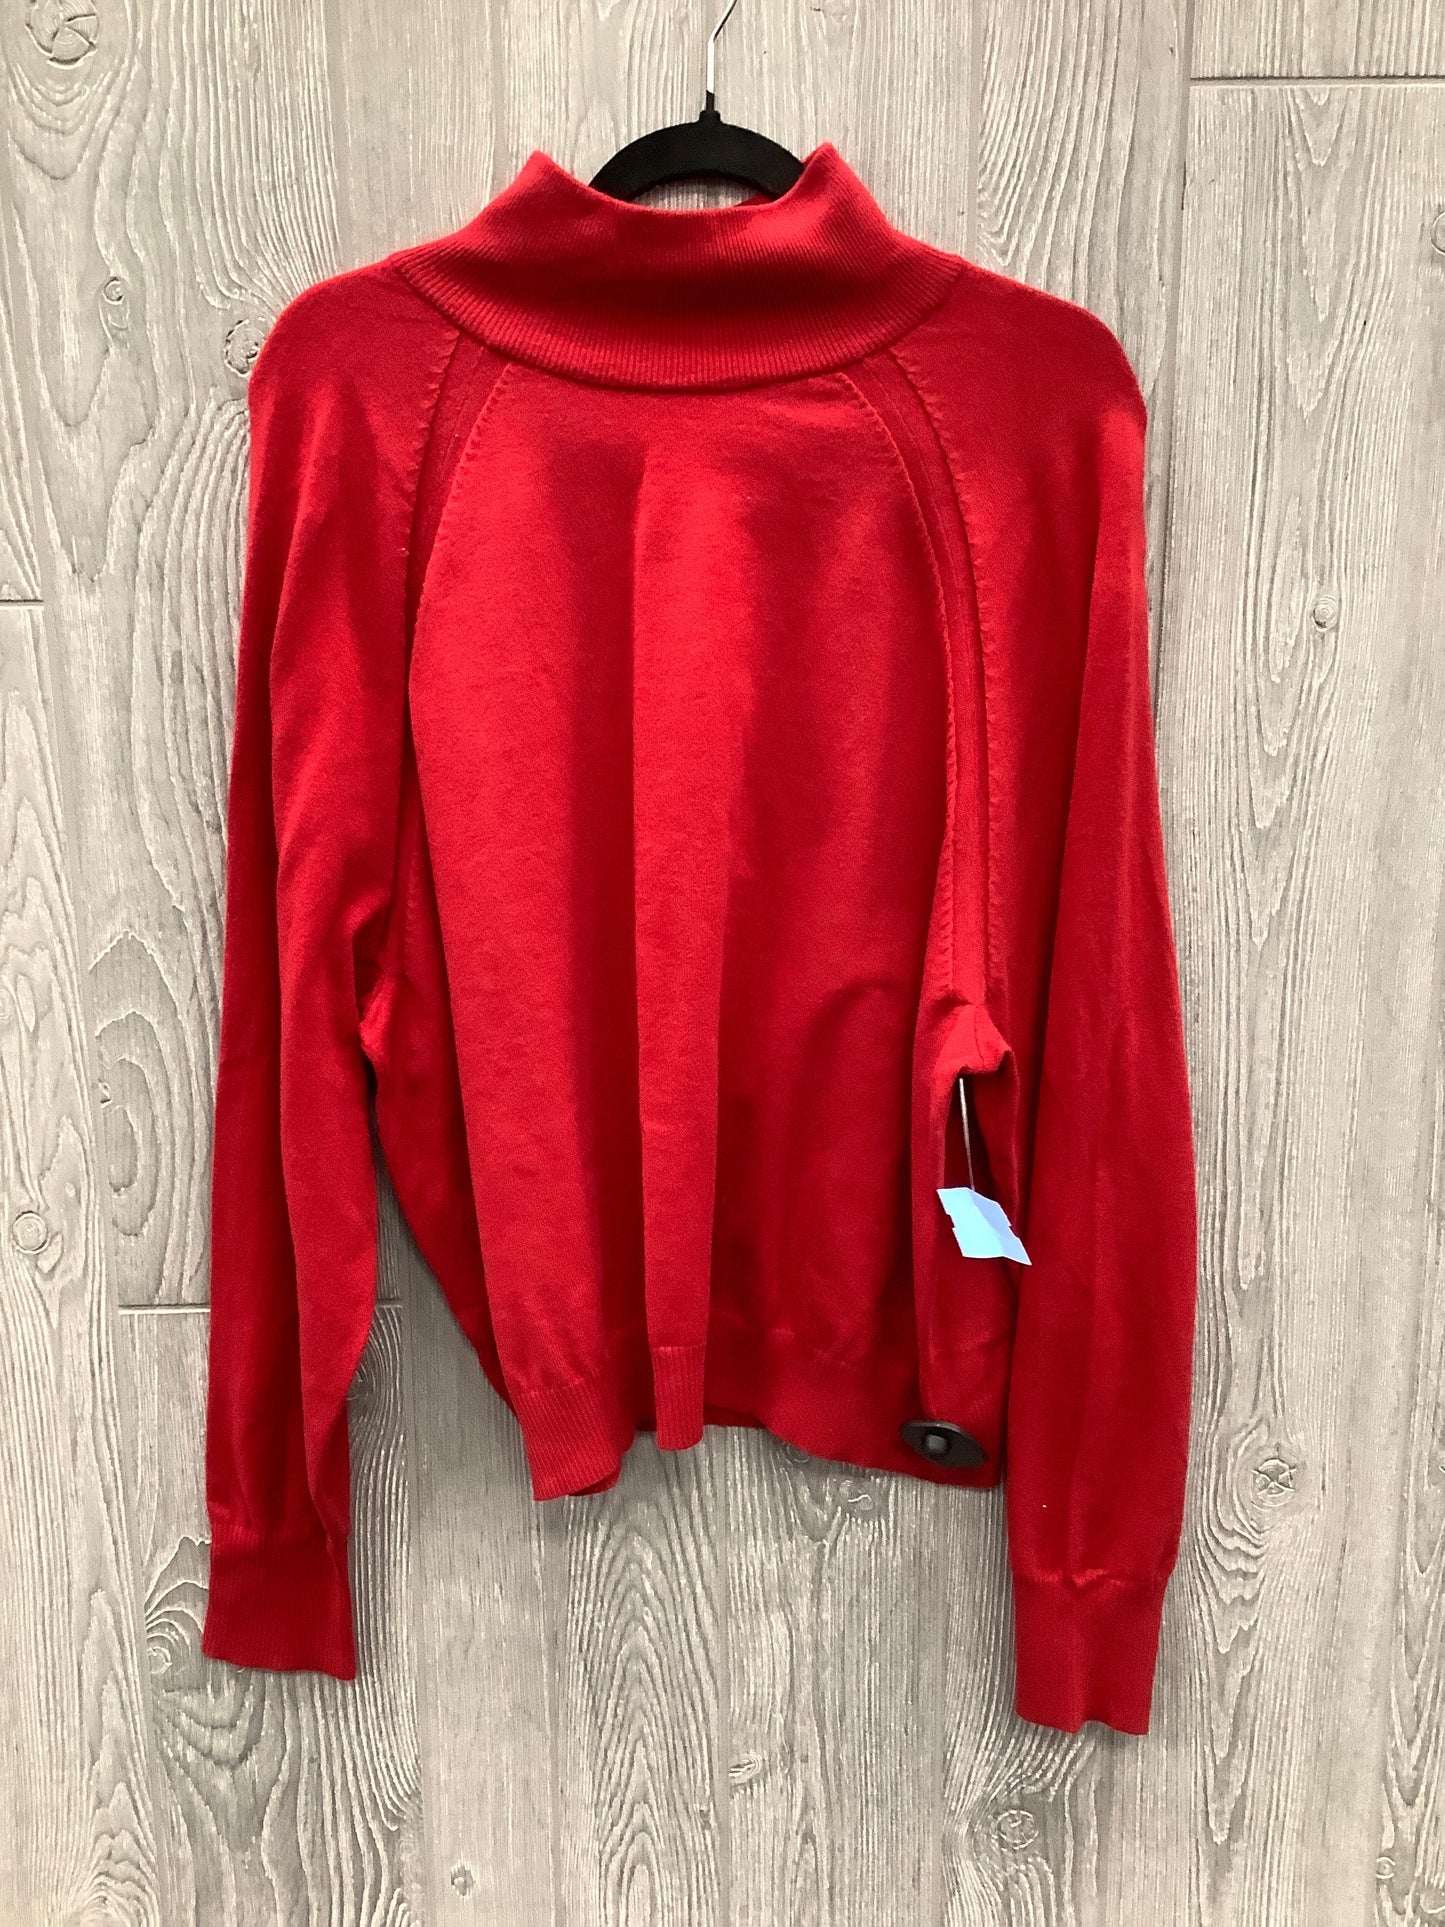 Sweater By A New Day  Size: Xl